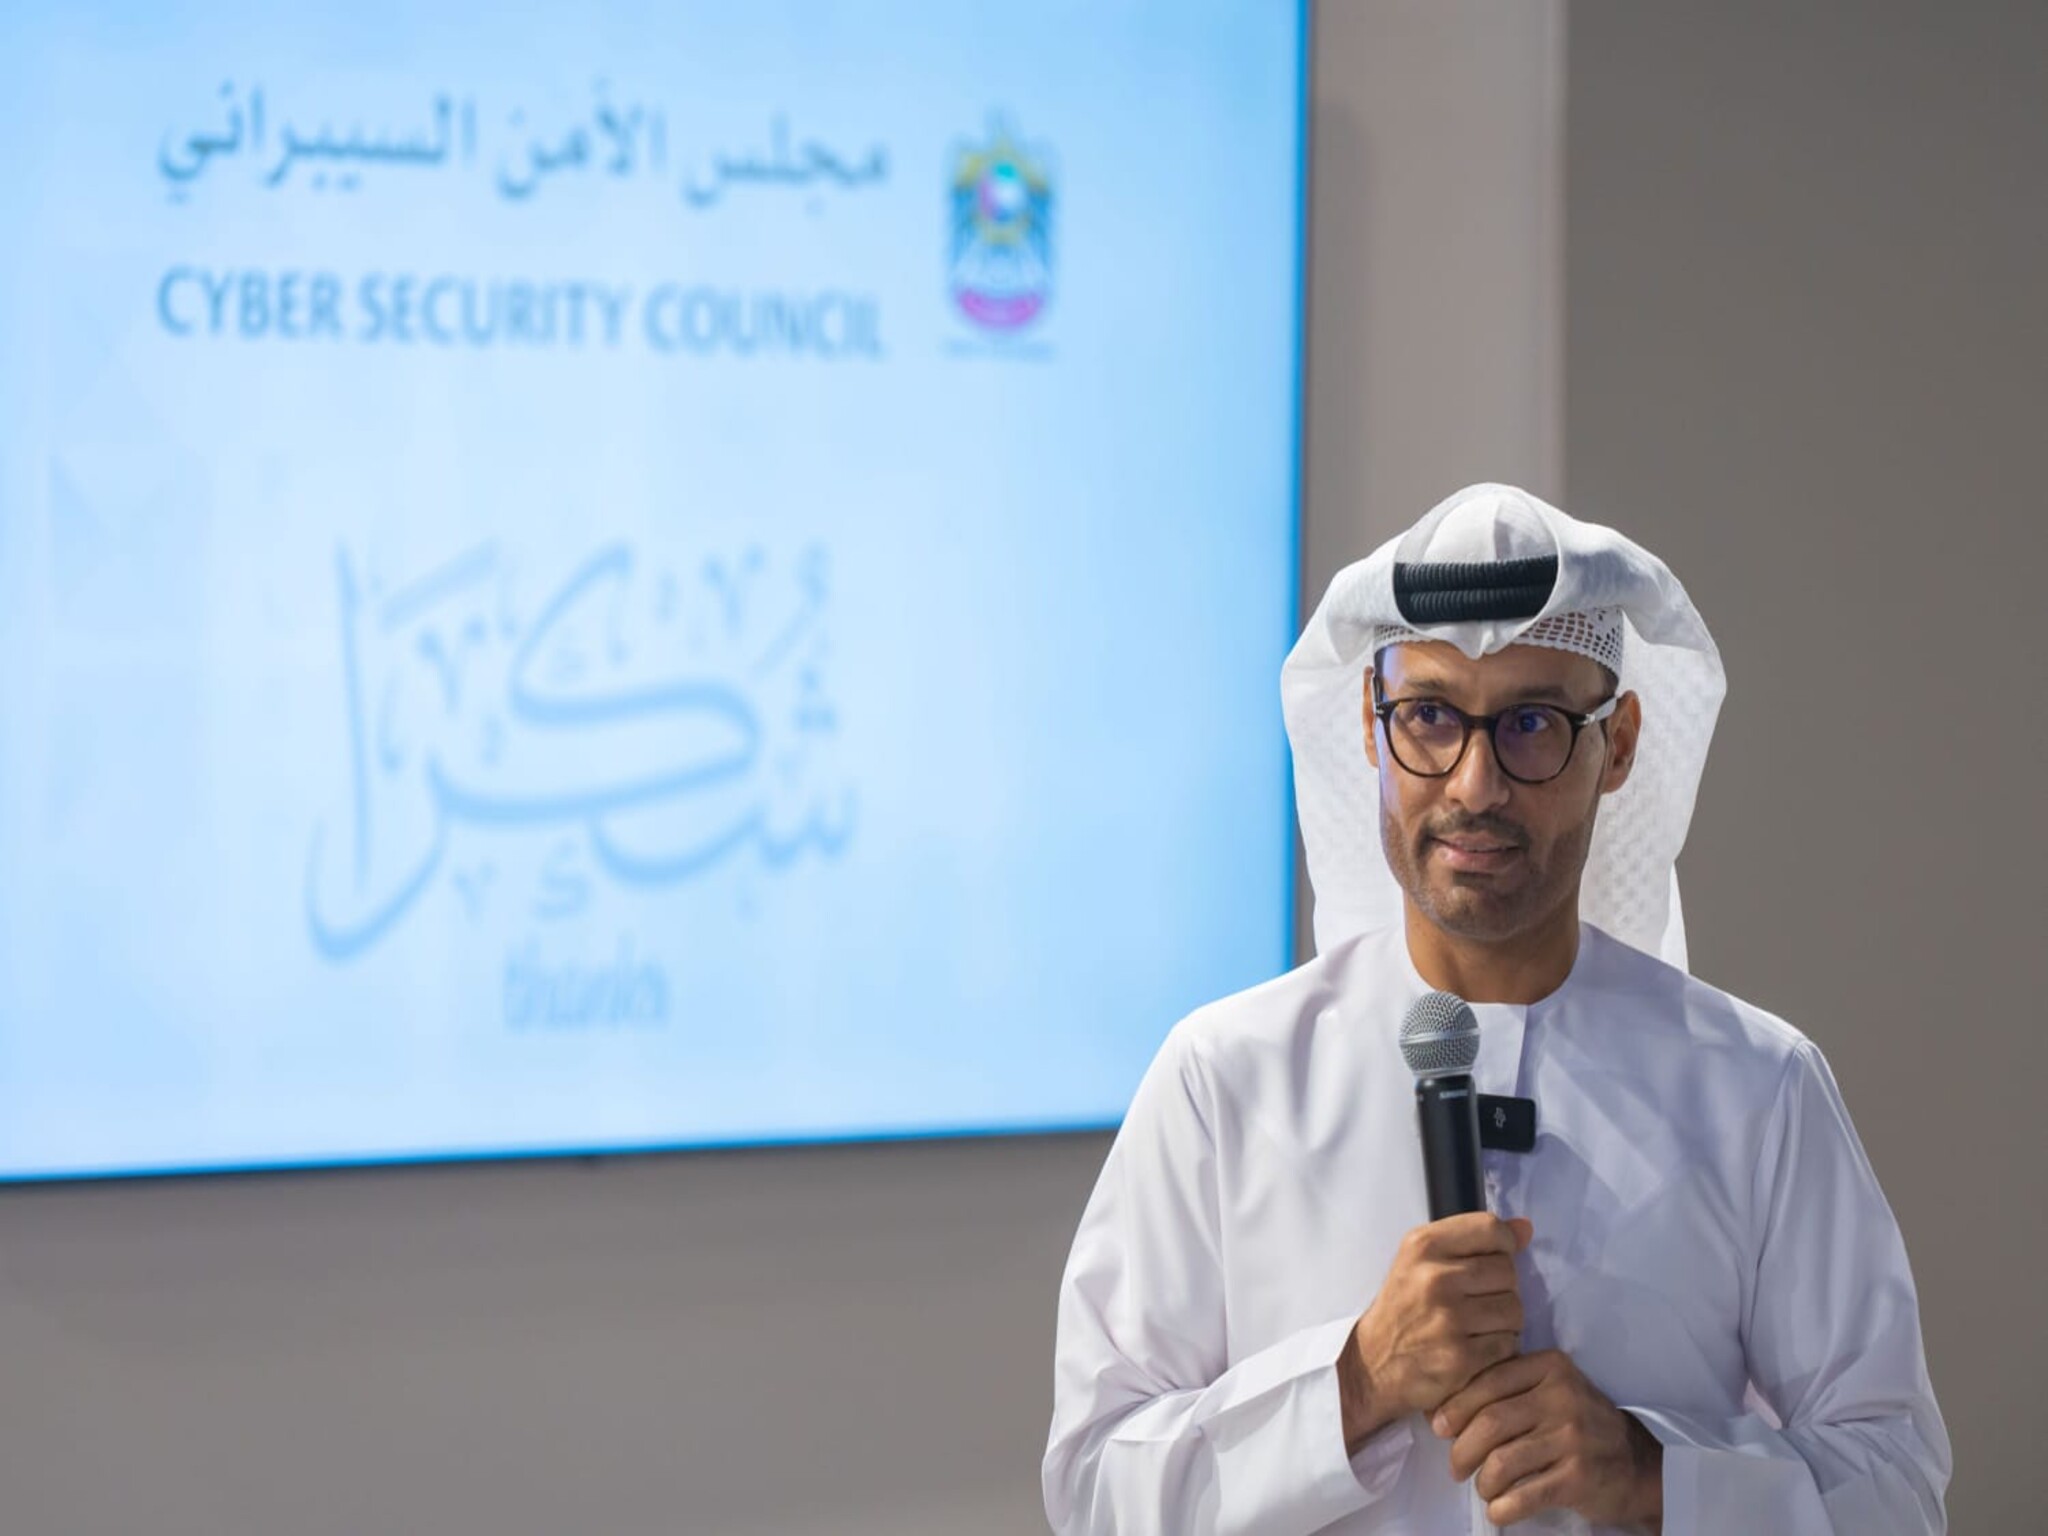 The UAE's Cyber Security Council issued a warning to Google Chrome users